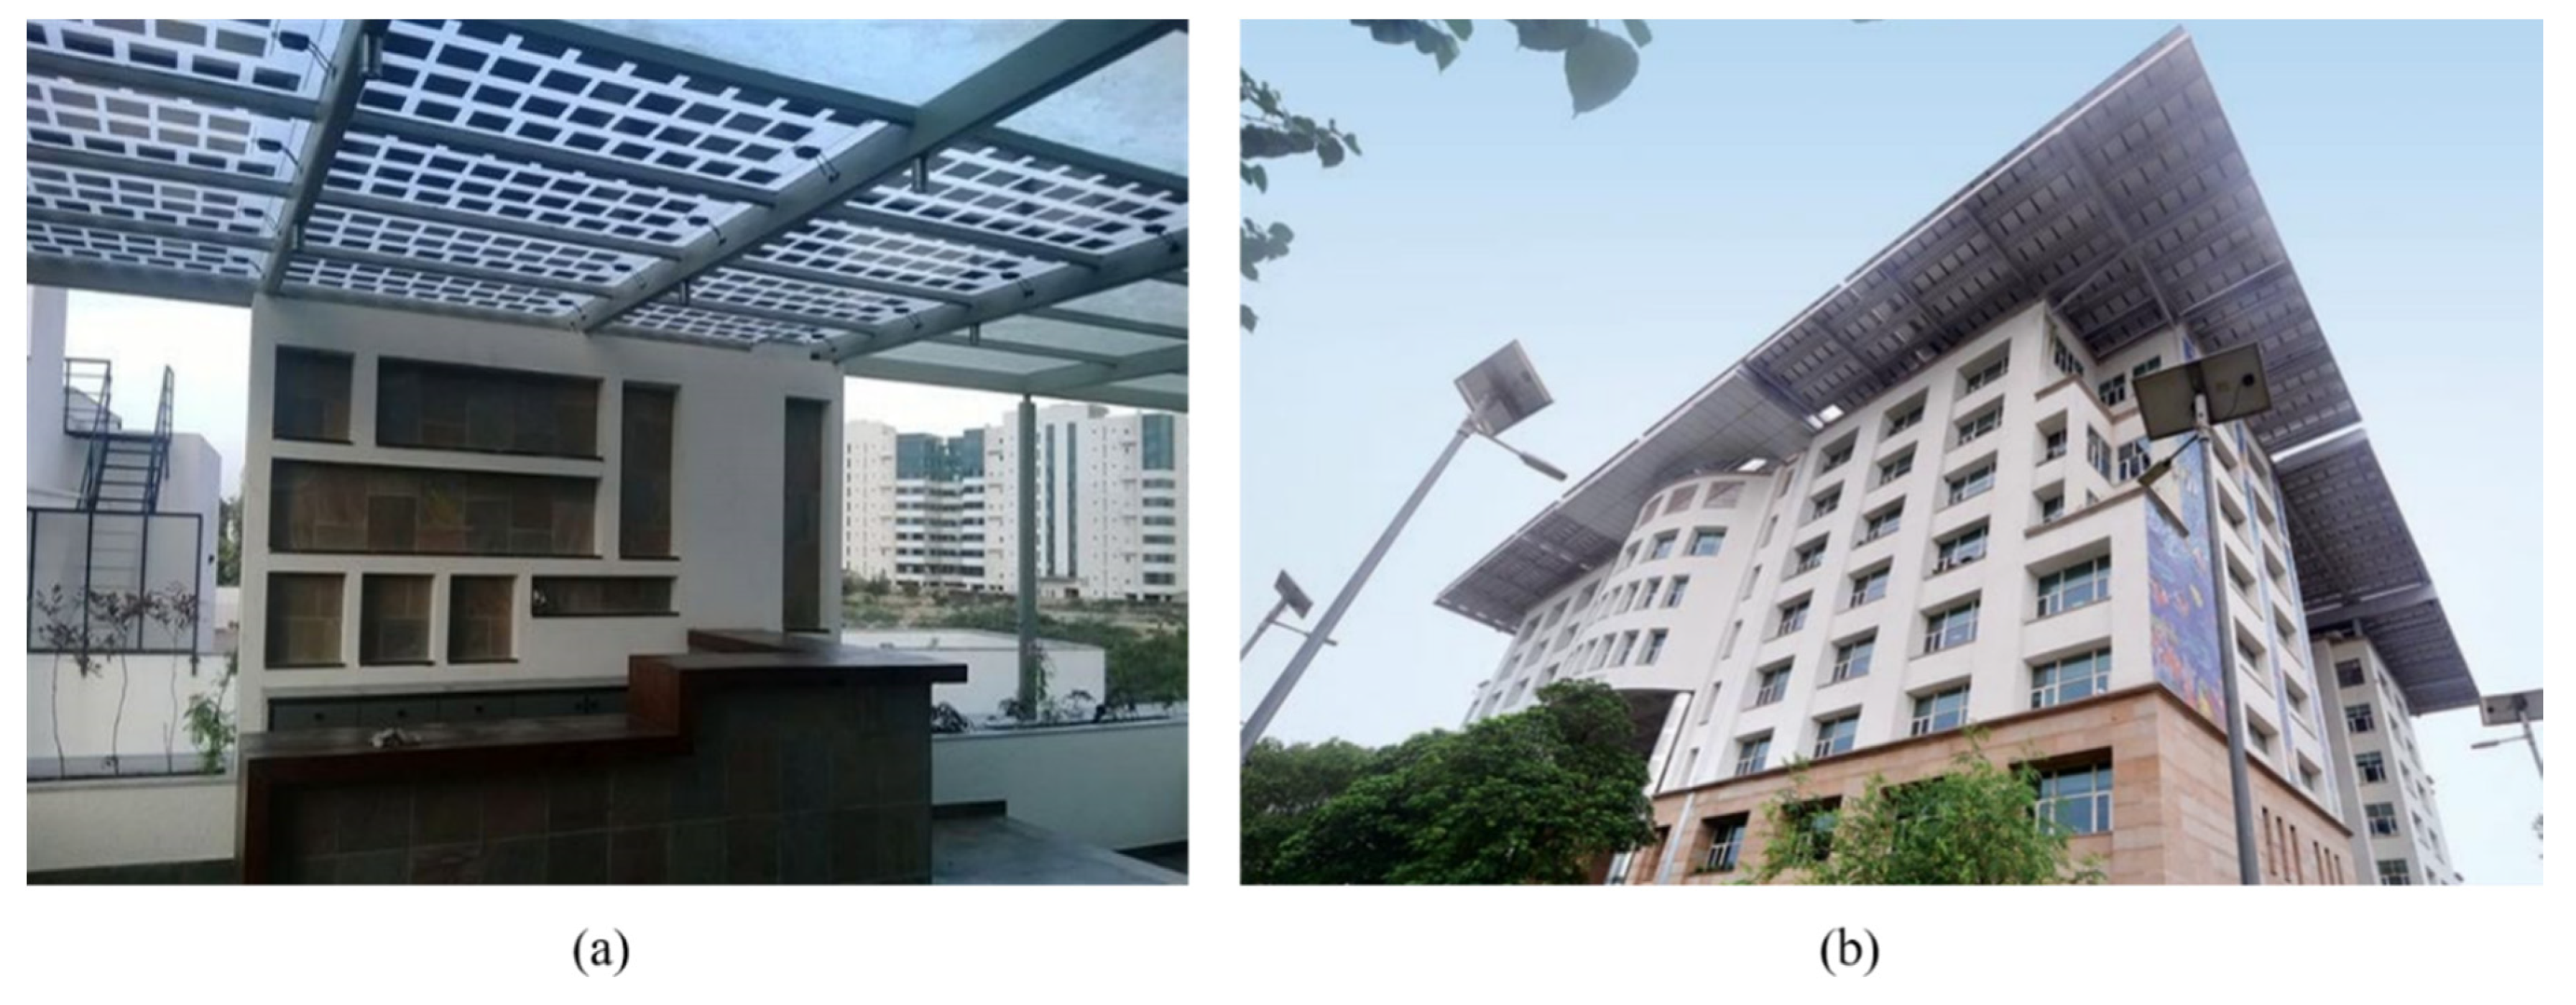 Applied Sciences Free Full Text Status Of Bipv And Bapv System For Less Energy Hungry Building In India A Review Html